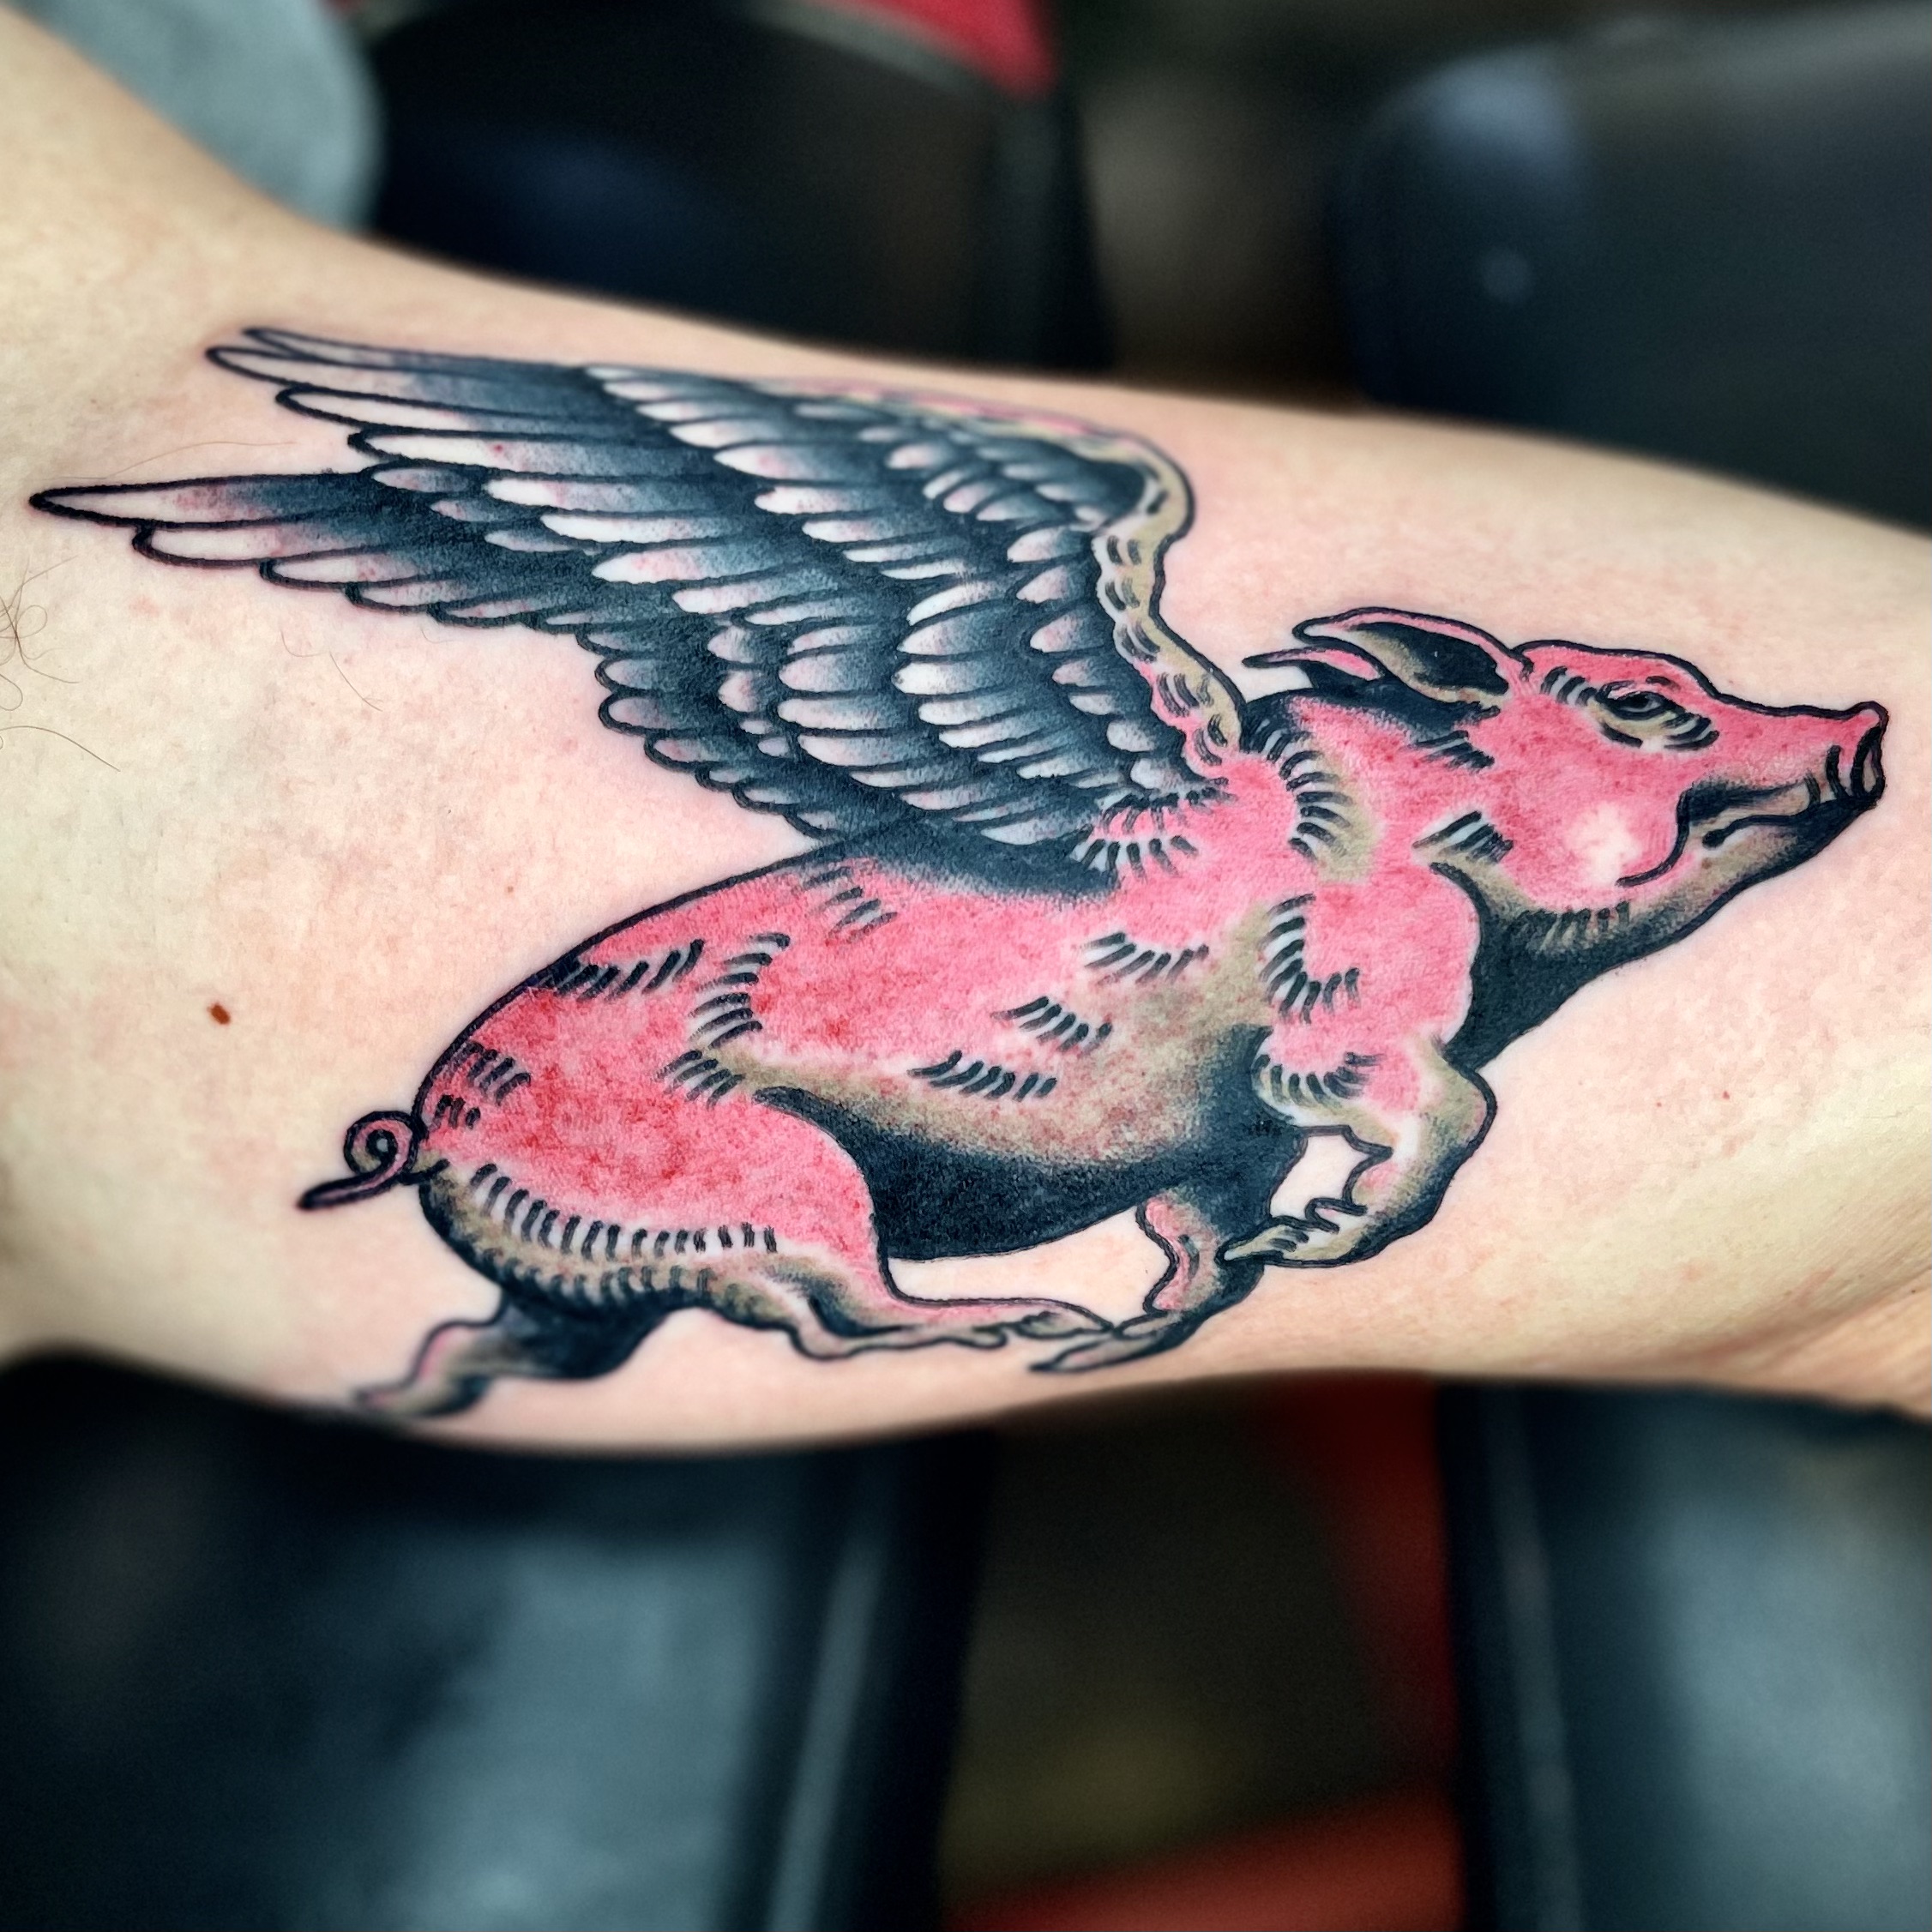 tattoo of a flying pig from one of the best tattoo shops in dallas texas